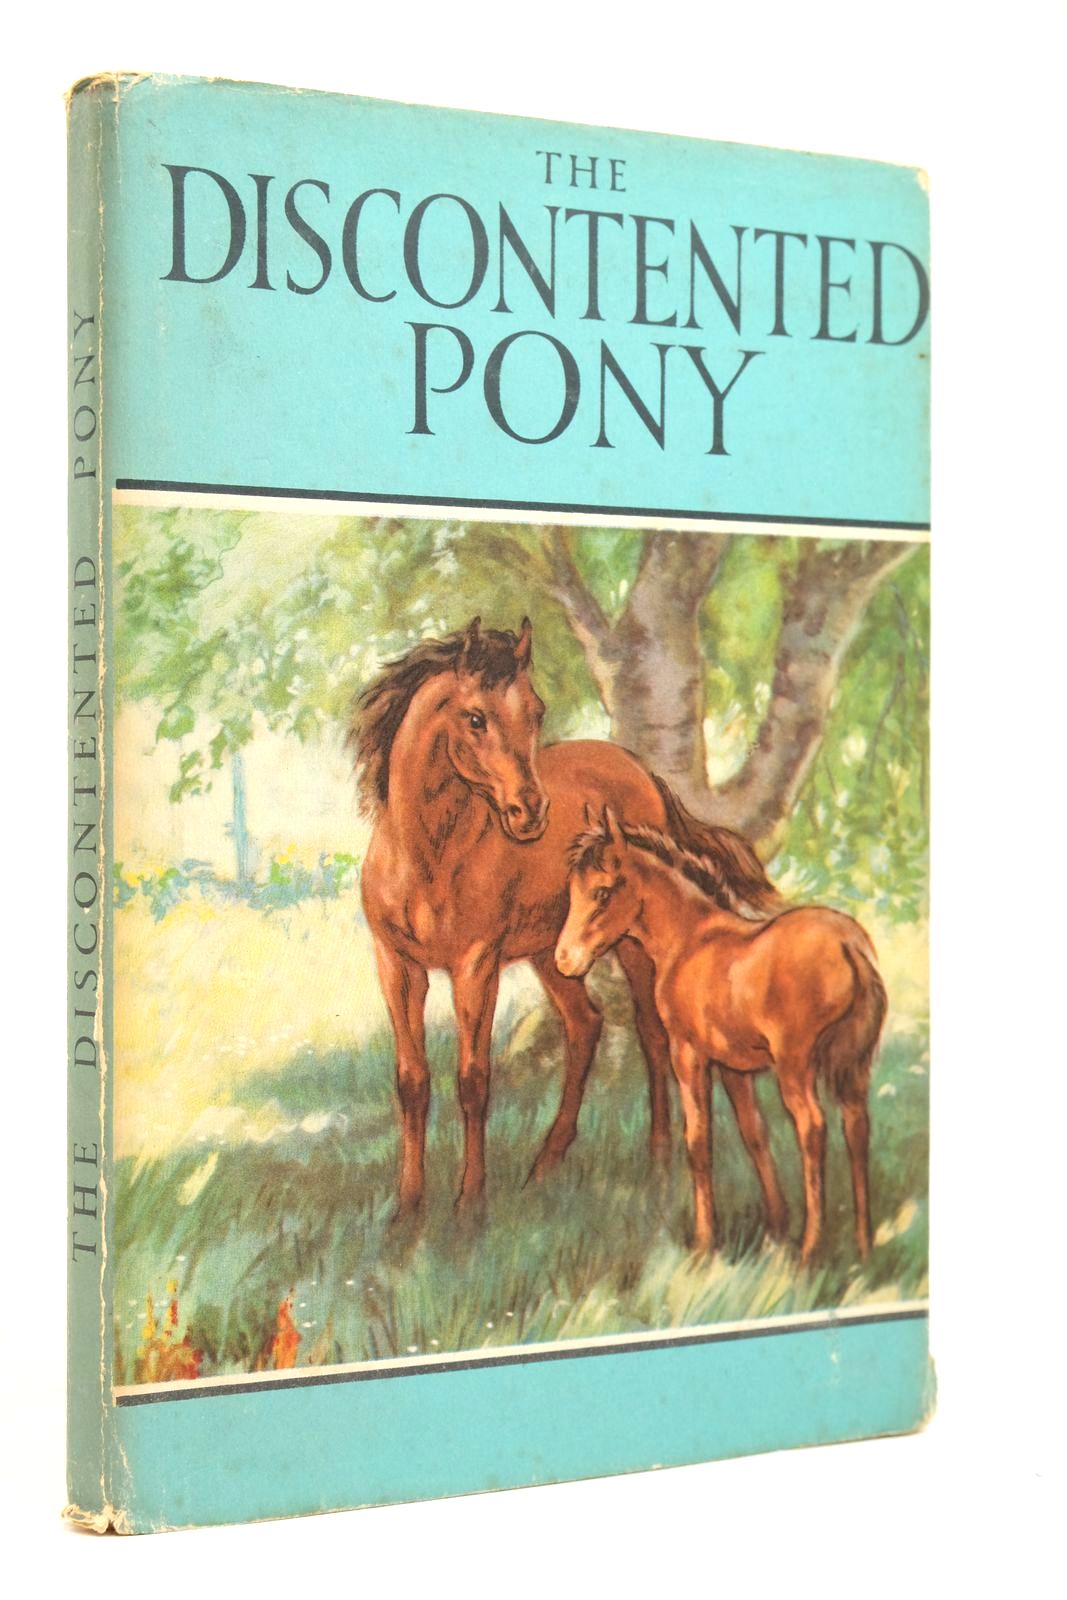 Photo of THE DISCONTENTED PONY written by Barr, Noel illustrated by Hickling, P.B. published by Wills & Hepworth Ltd. (STOCK CODE: 2135160)  for sale by Stella & Rose's Books